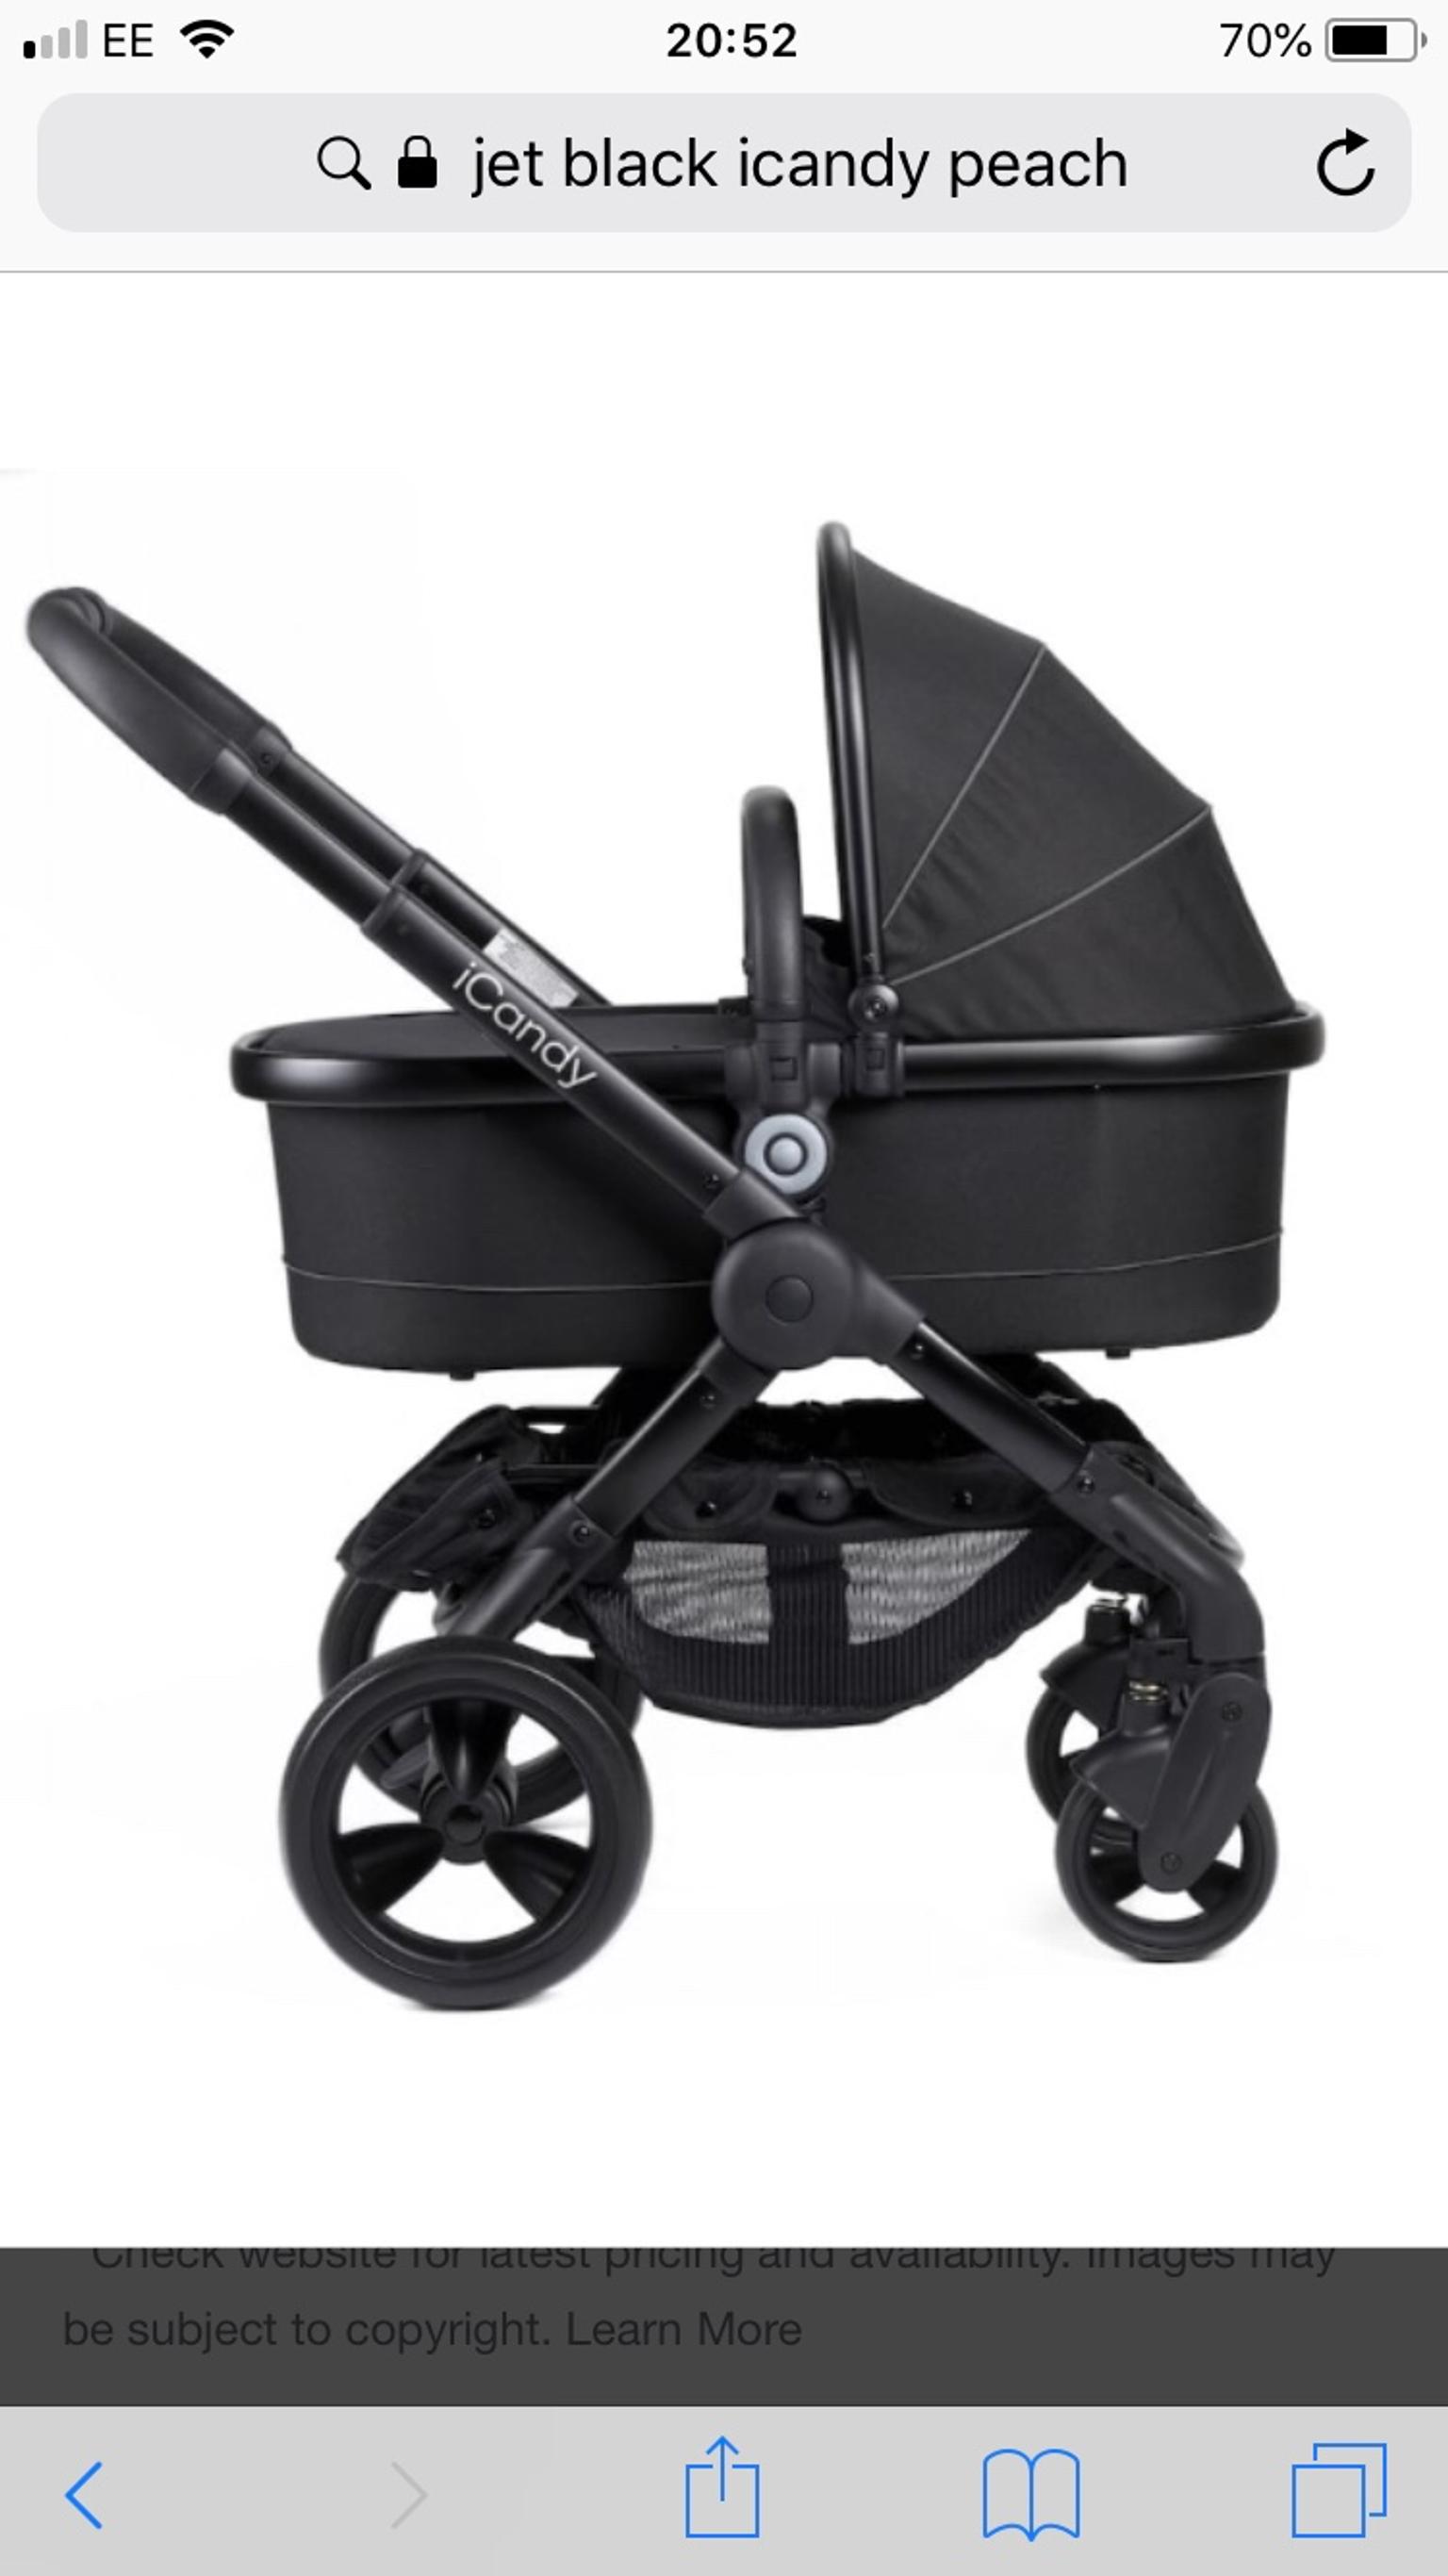 icandy 3 in 1 travel system